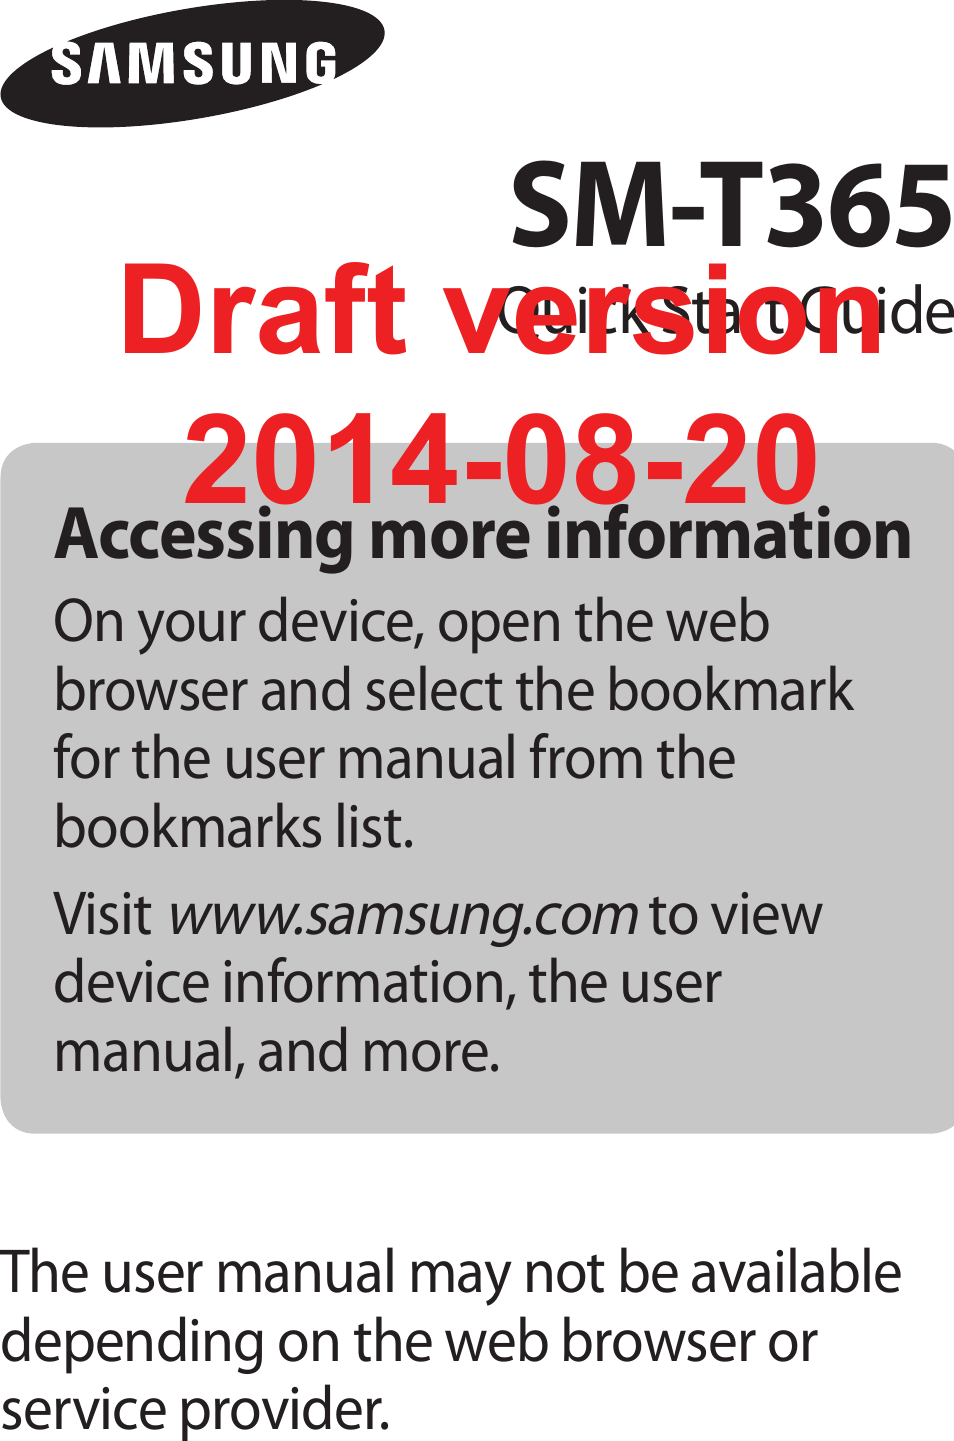 Accessing more informationOn your device, open the web browser and select the bookmark for the user manual from the bookmarks list.Visit www.samsung.com to view device information, the user manual, and more.The user manual may not be available depending on the web browser or service provider.SM-T365Quick Start GuideDraft version2014-08-20